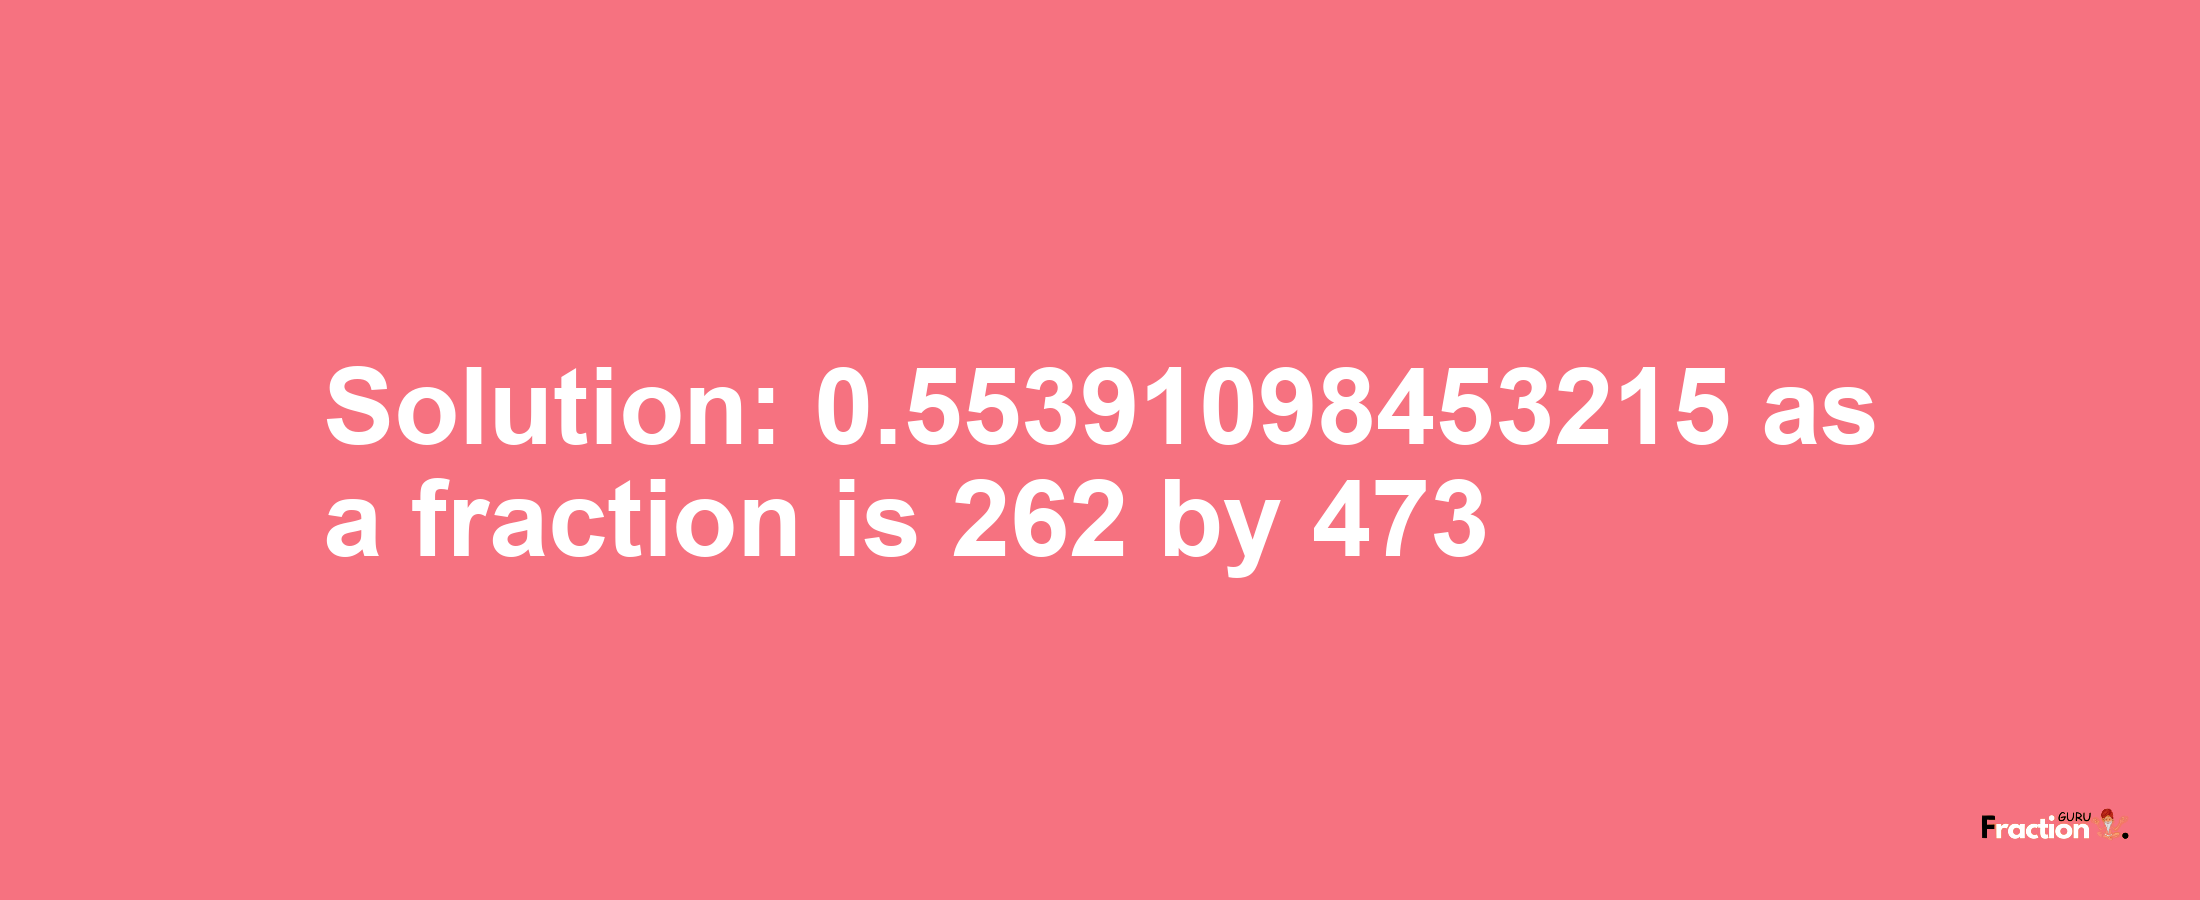 Solution:0.55391098453215 as a fraction is 262/473